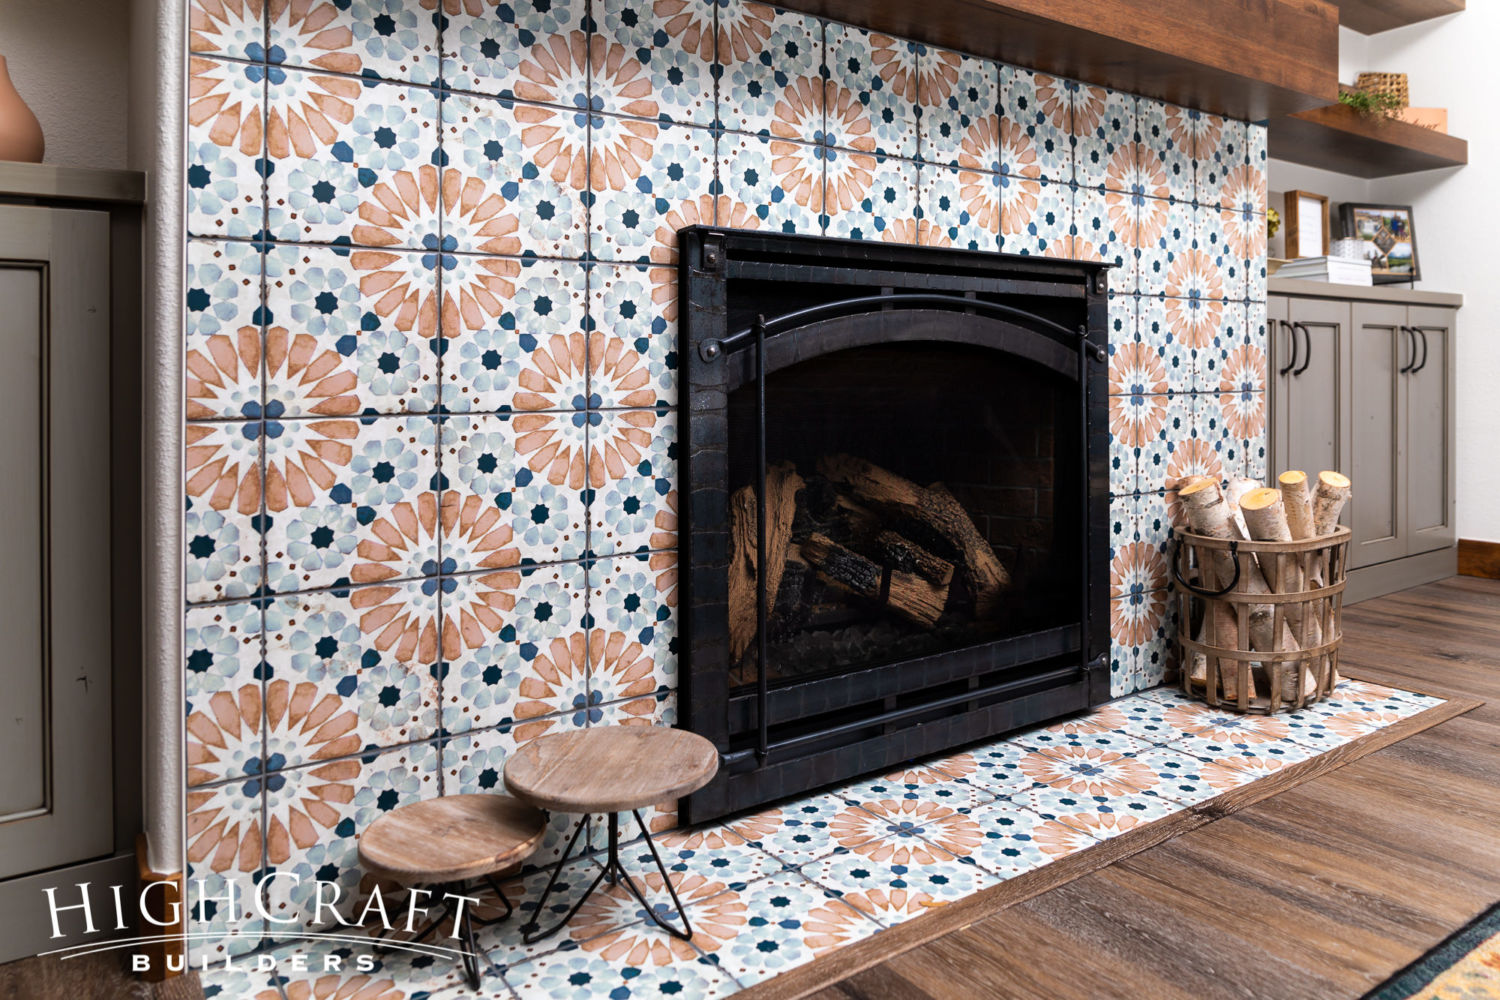 10 Fireplaces To Warm Your Heart, Pictures Of Tile Fireplace Surrounds